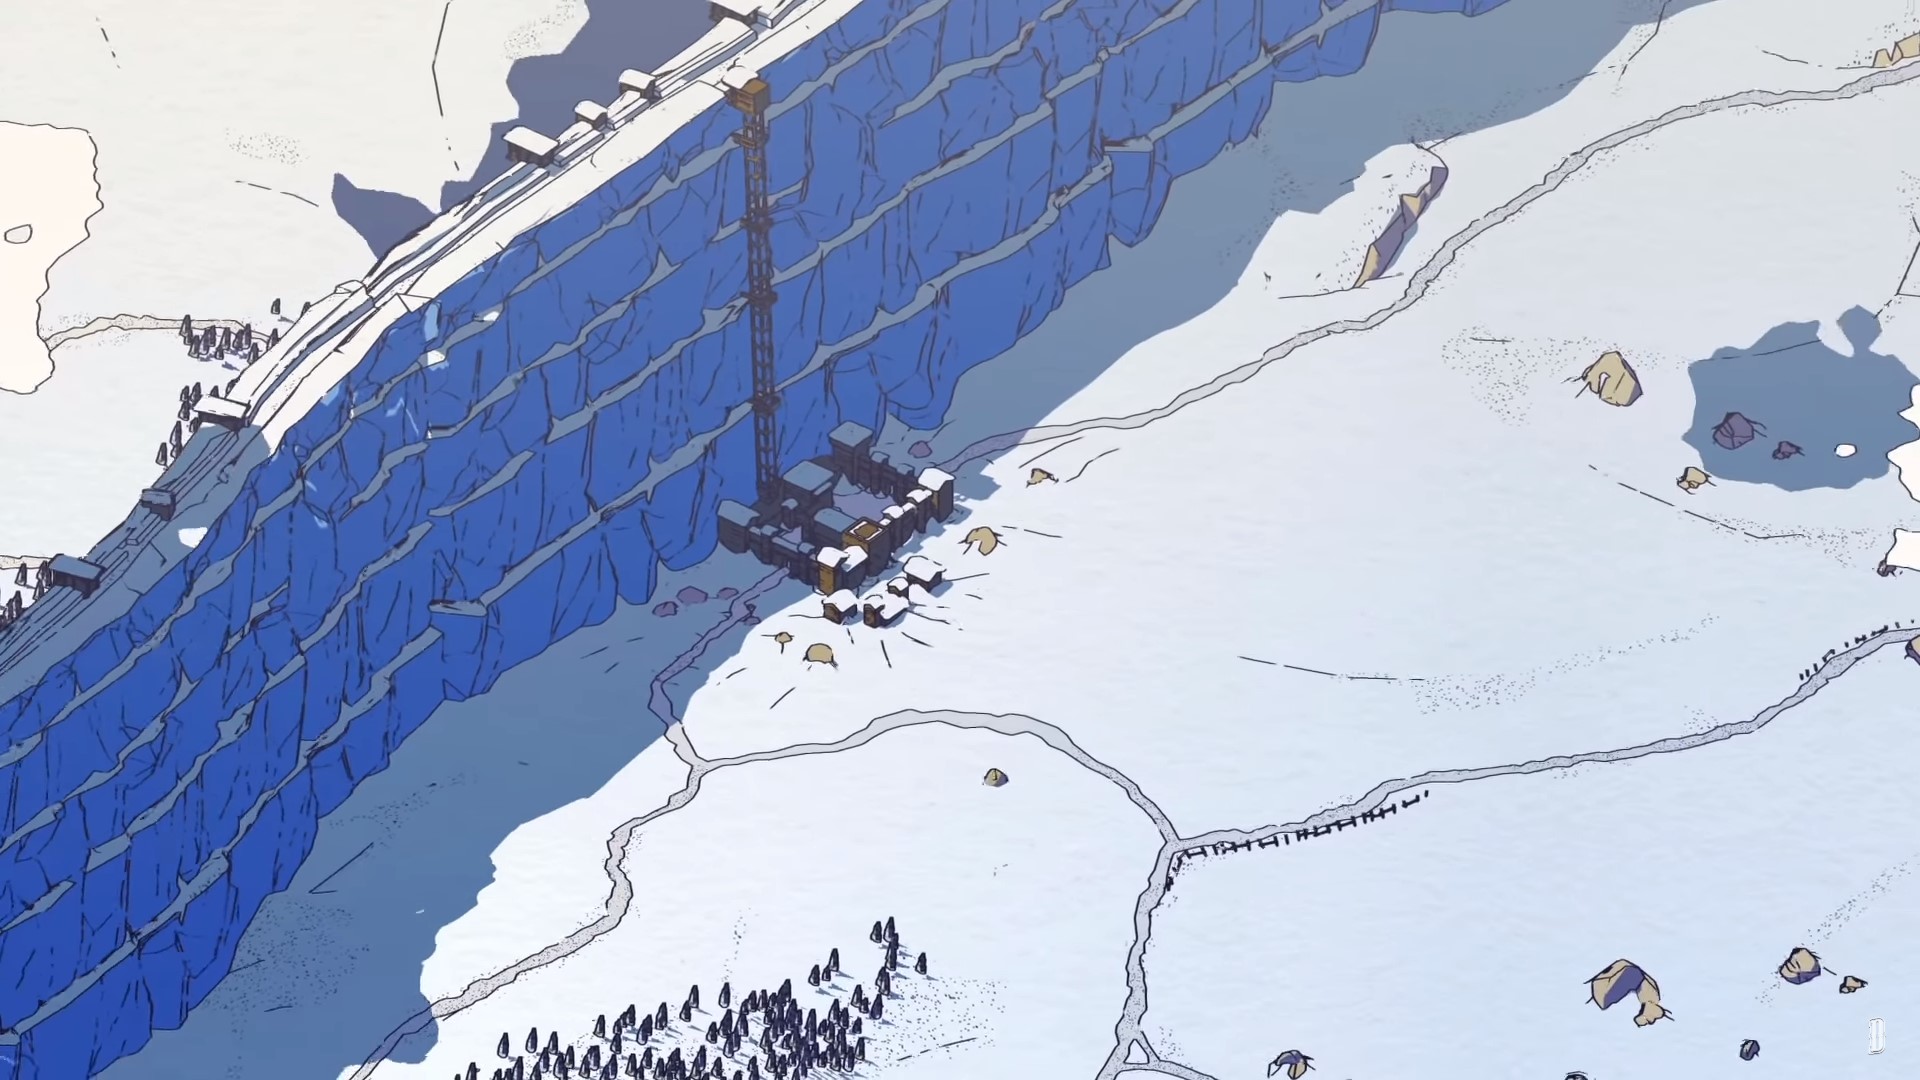 Best idle games: Game of Thrones: Tale of Crows. Image shows the wall to the north of Westeros.